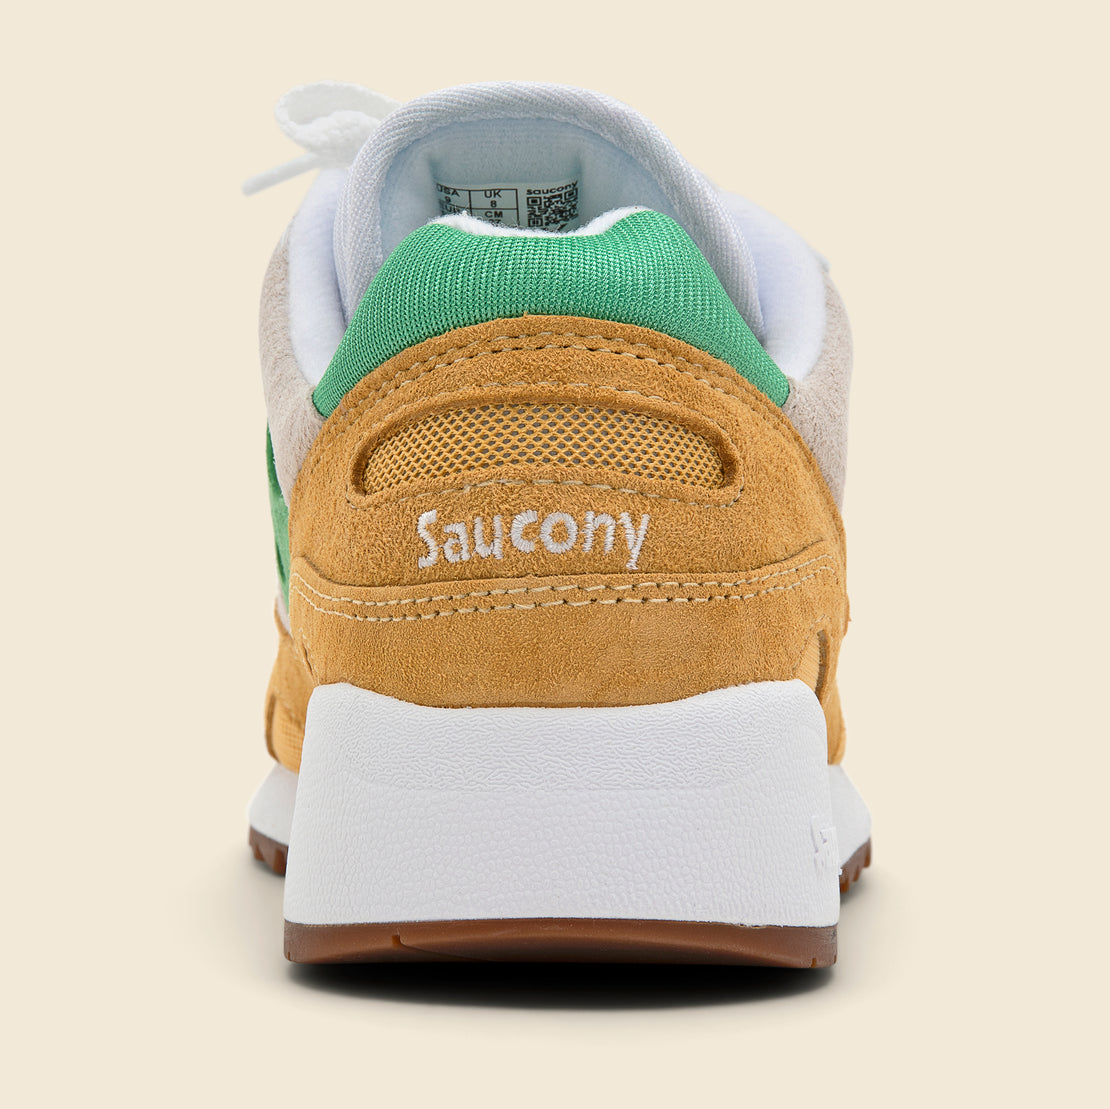 Shadow 6000 Sneaker - White/Mint/Yellow - Saucony - STAG Provisions - Shoes - Athletic